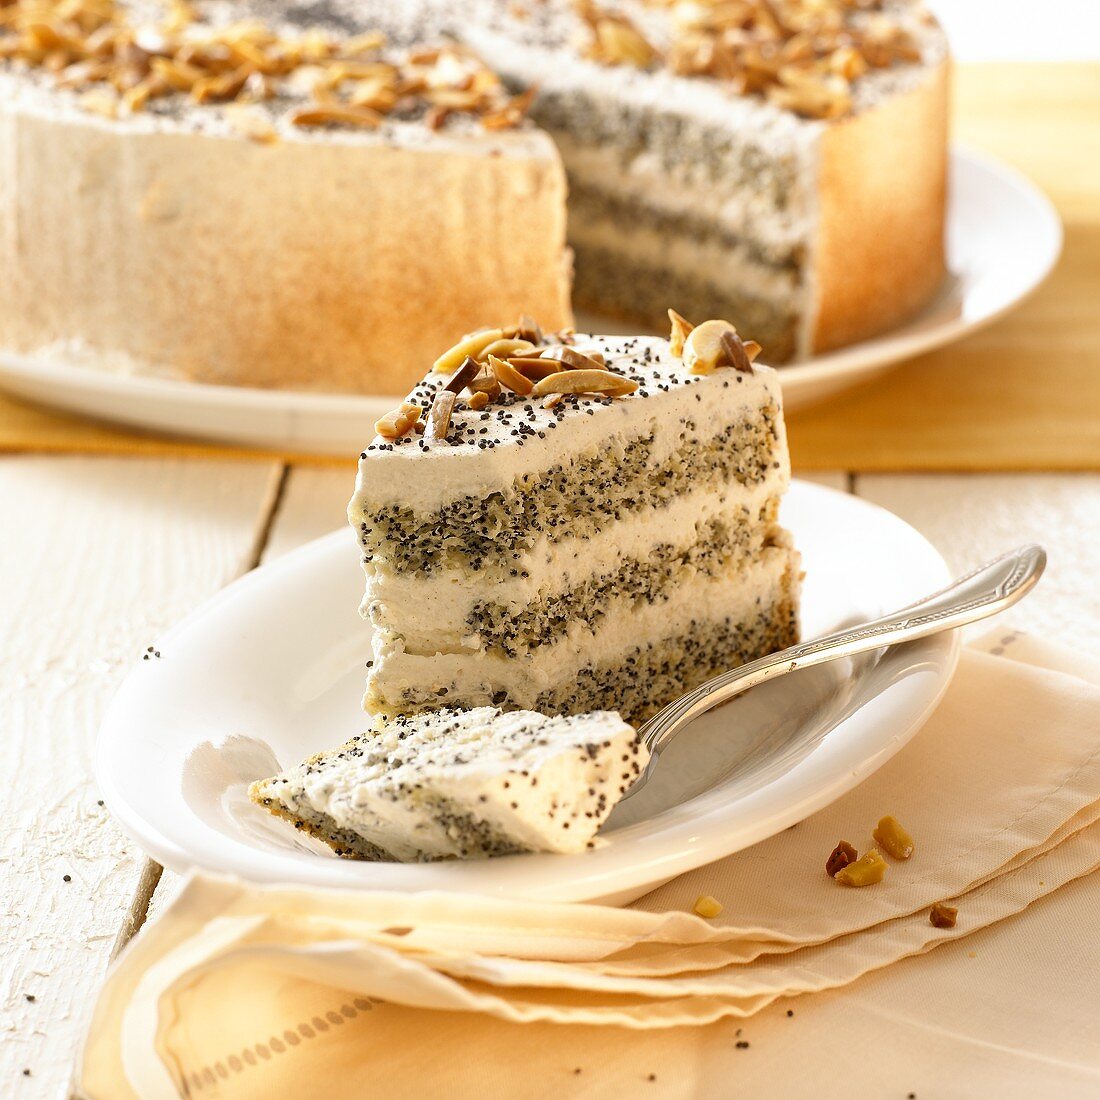 Poppy seed cake with chopped almonds